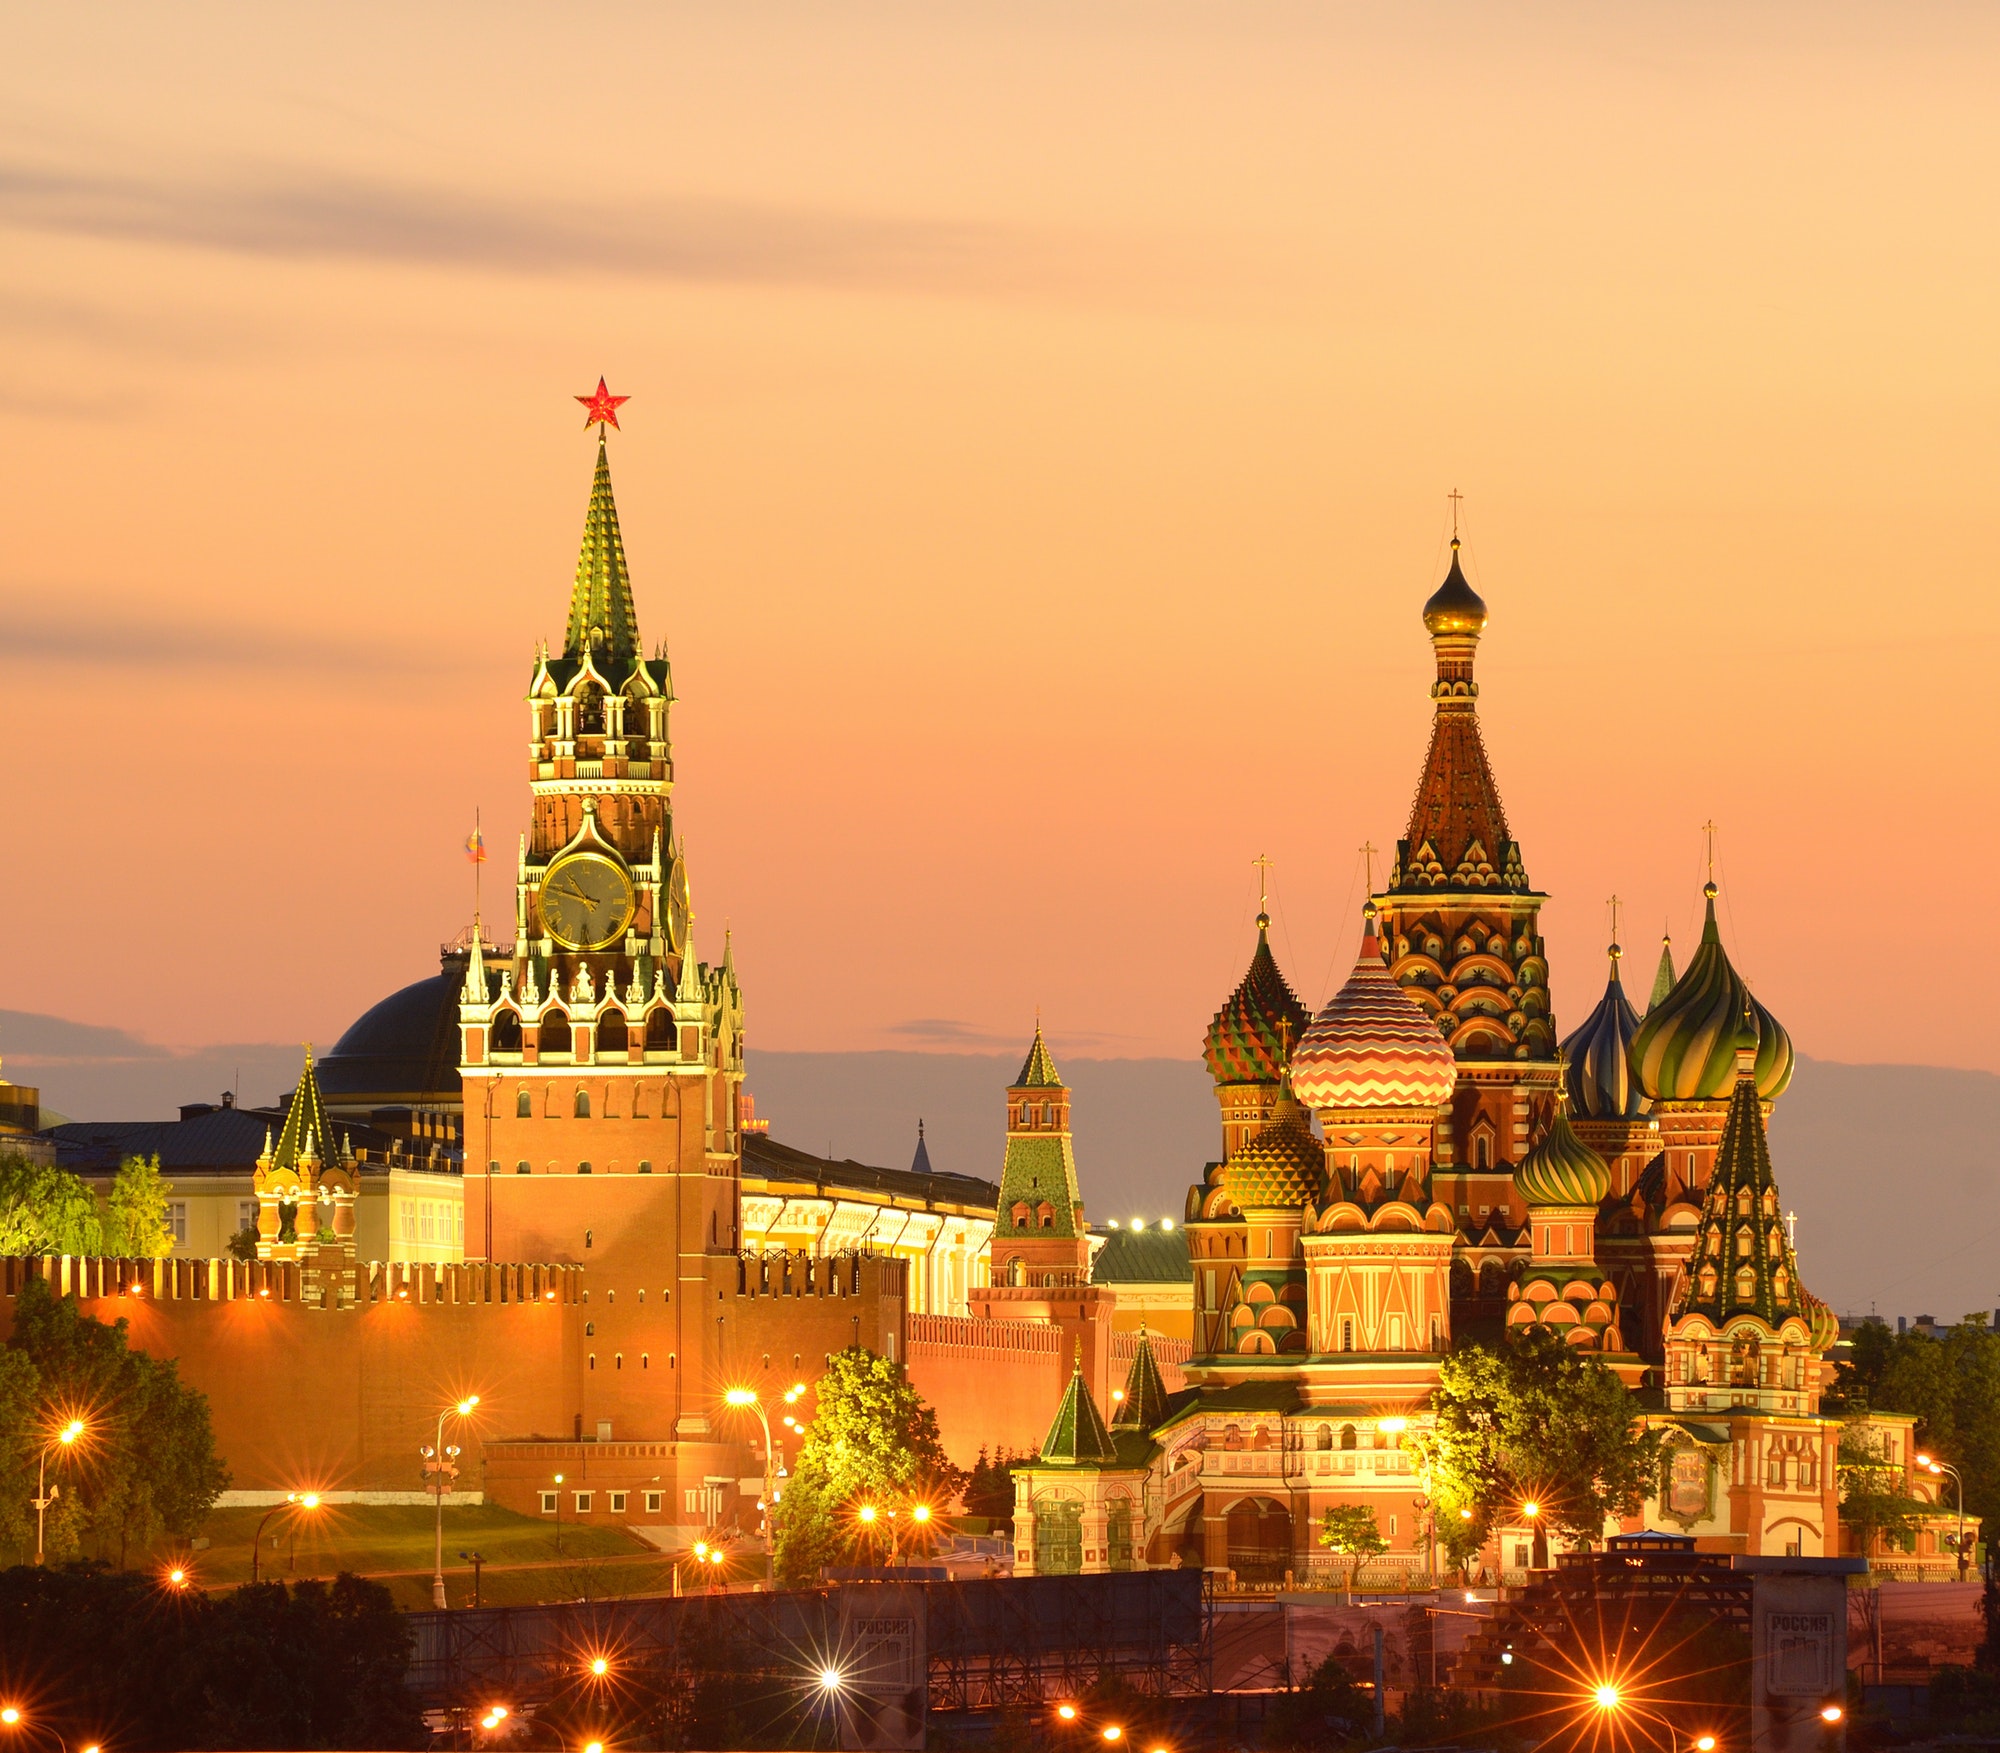 View of Kremlin towers, Saint Basils Cathedral at night, Moscow, Russia